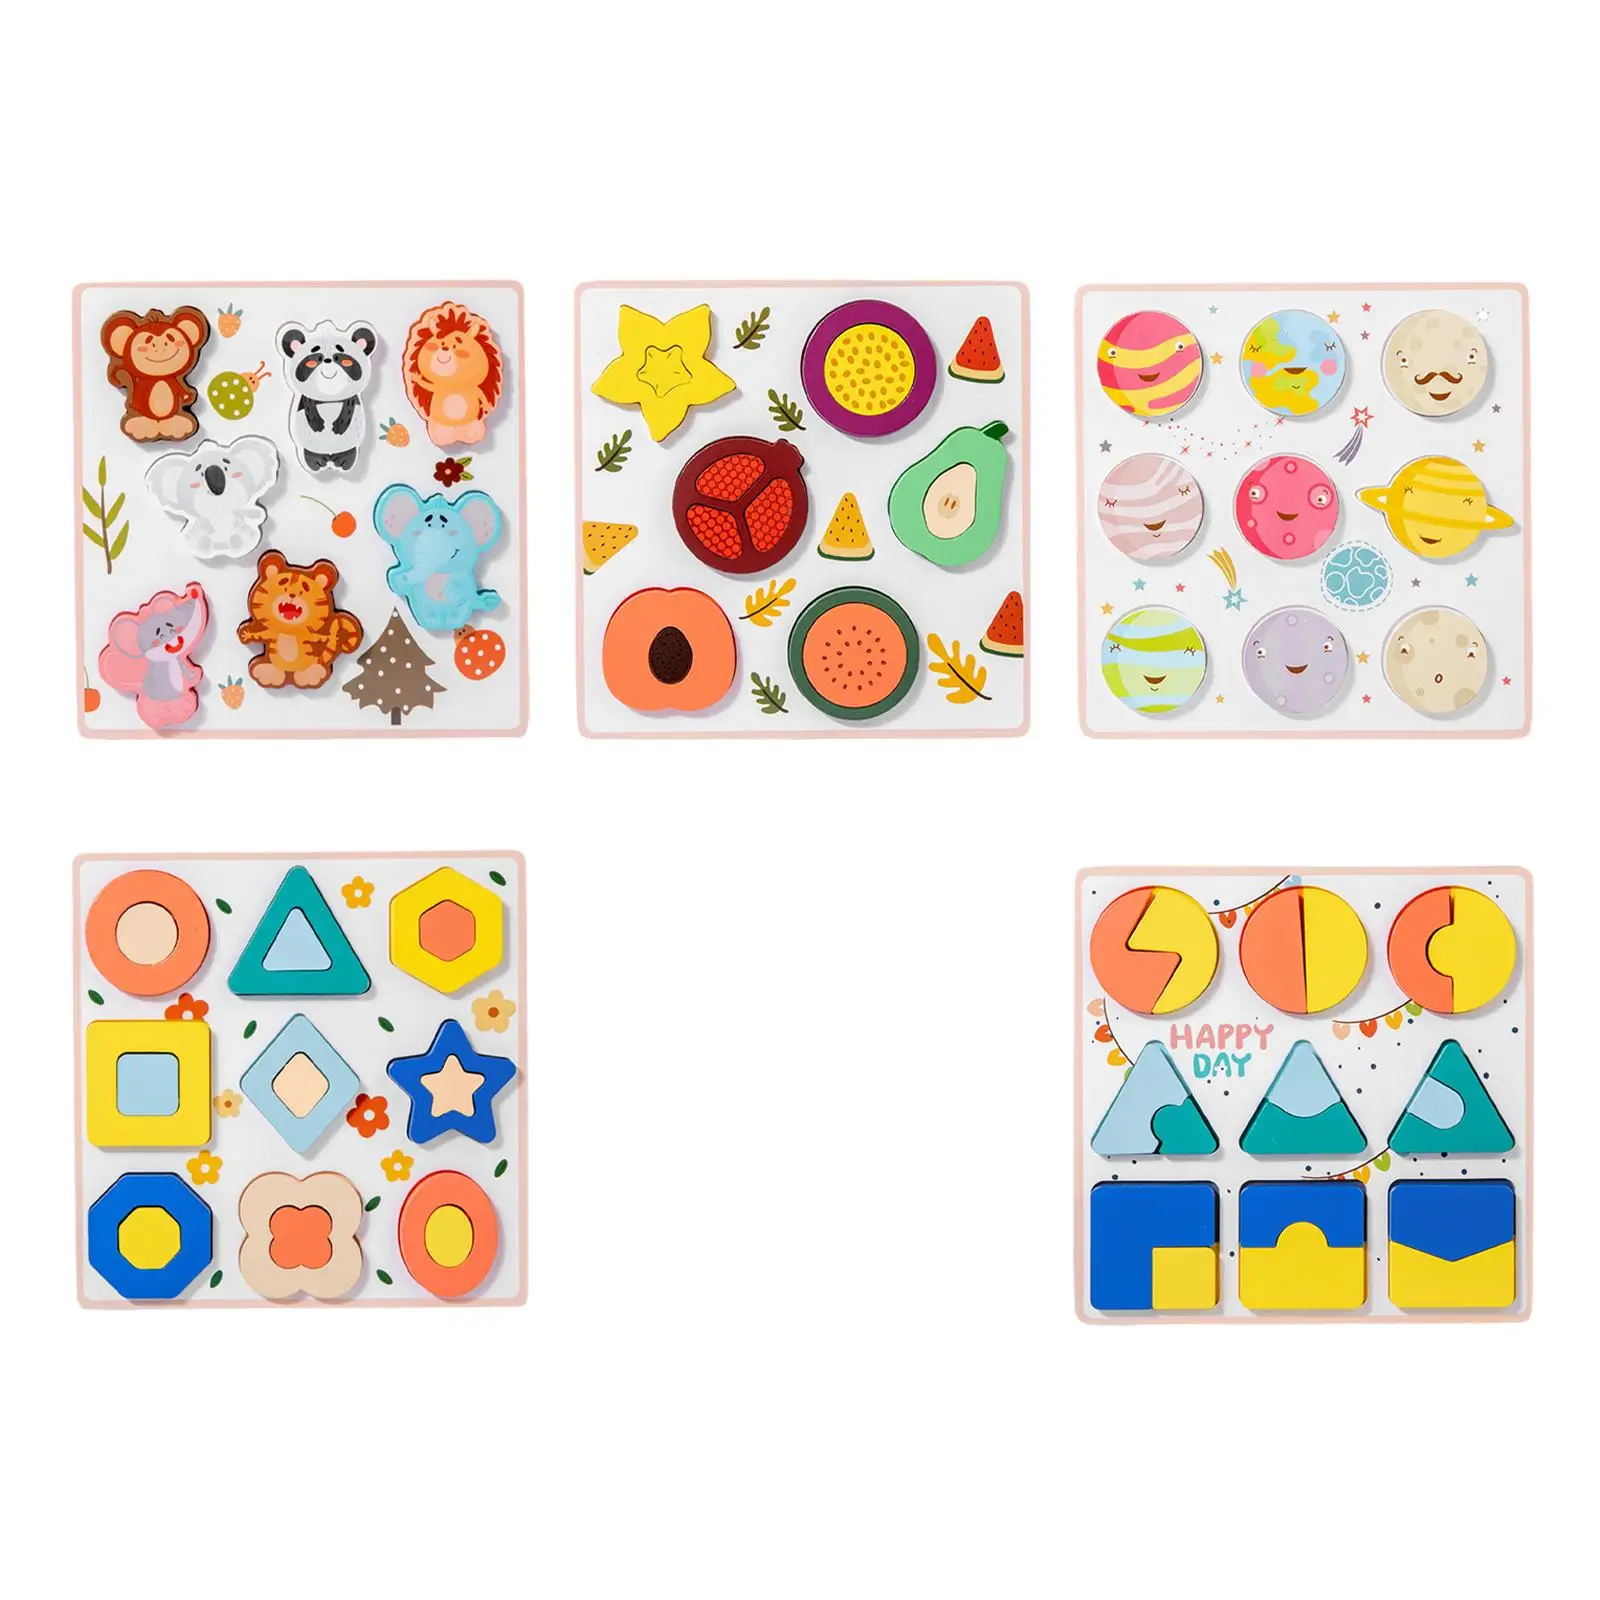 

Wooden Jigsaw Puzzles Learning Activities Fine Motor Skill Development Toy for Kids 1 2 3 Year Old Girls Boys Toddlers Gift